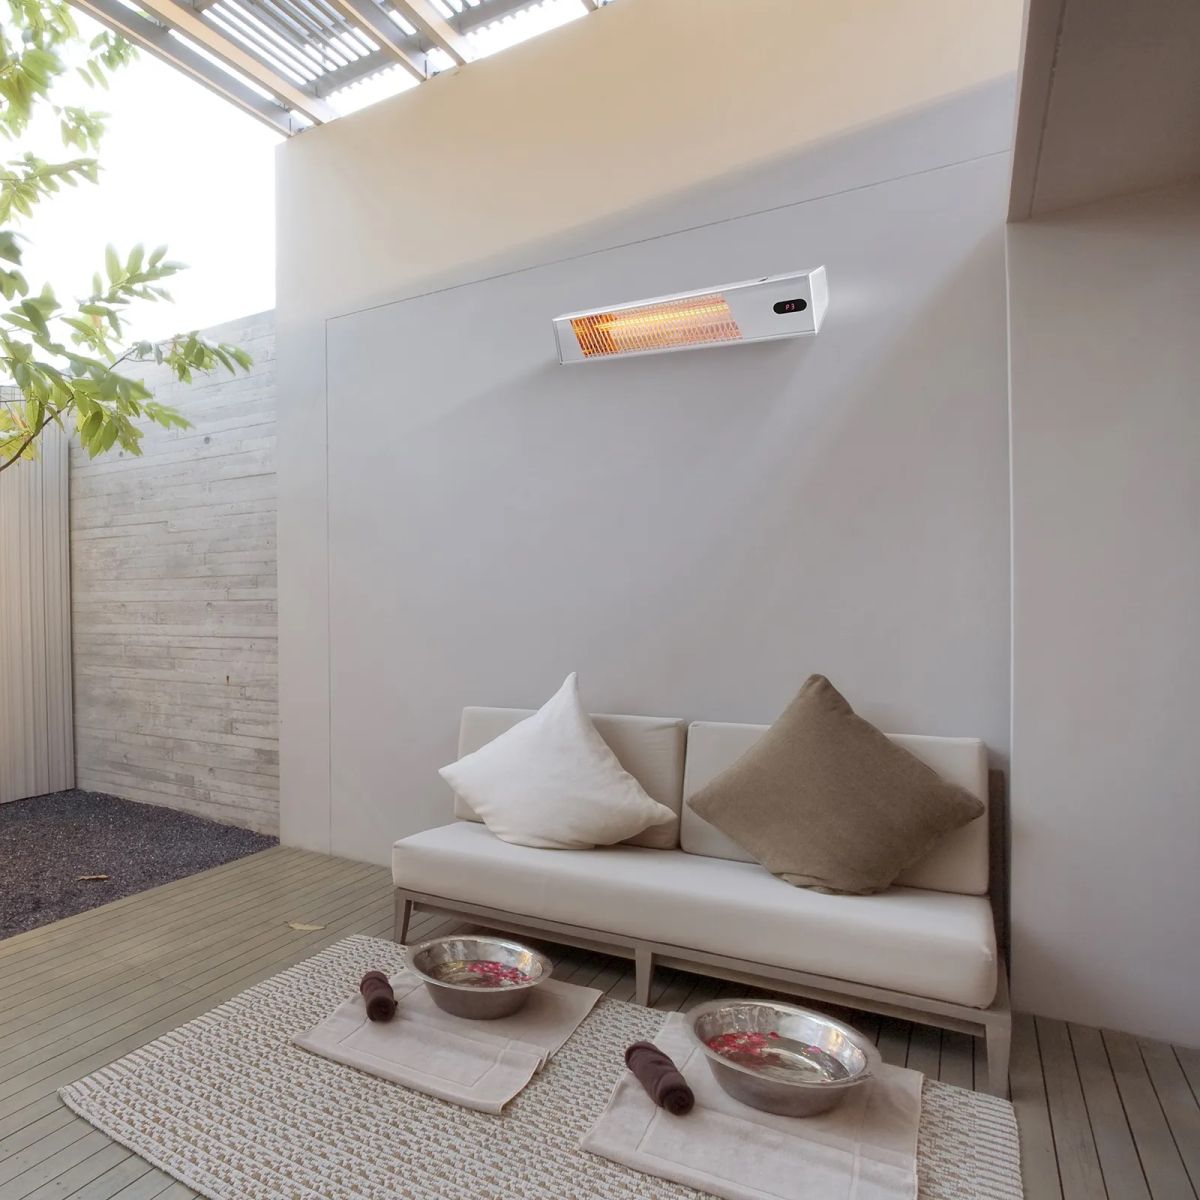 This image shows the stylish design of the Excelair EOHA20AR radiant heater mounted in a room